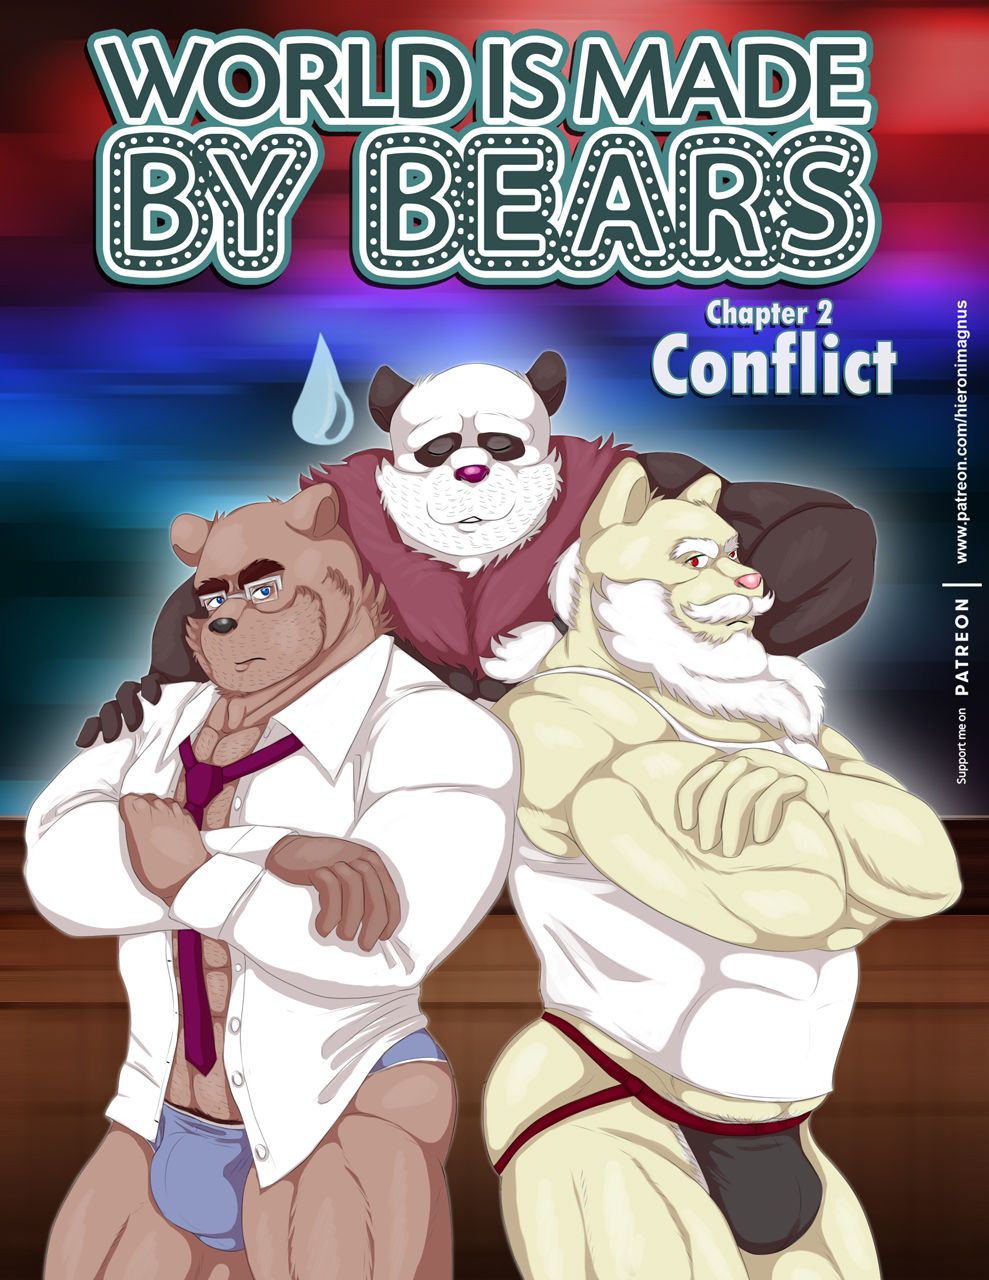 [Begami] World is made by bear - Chapter 2 [On Going] 1